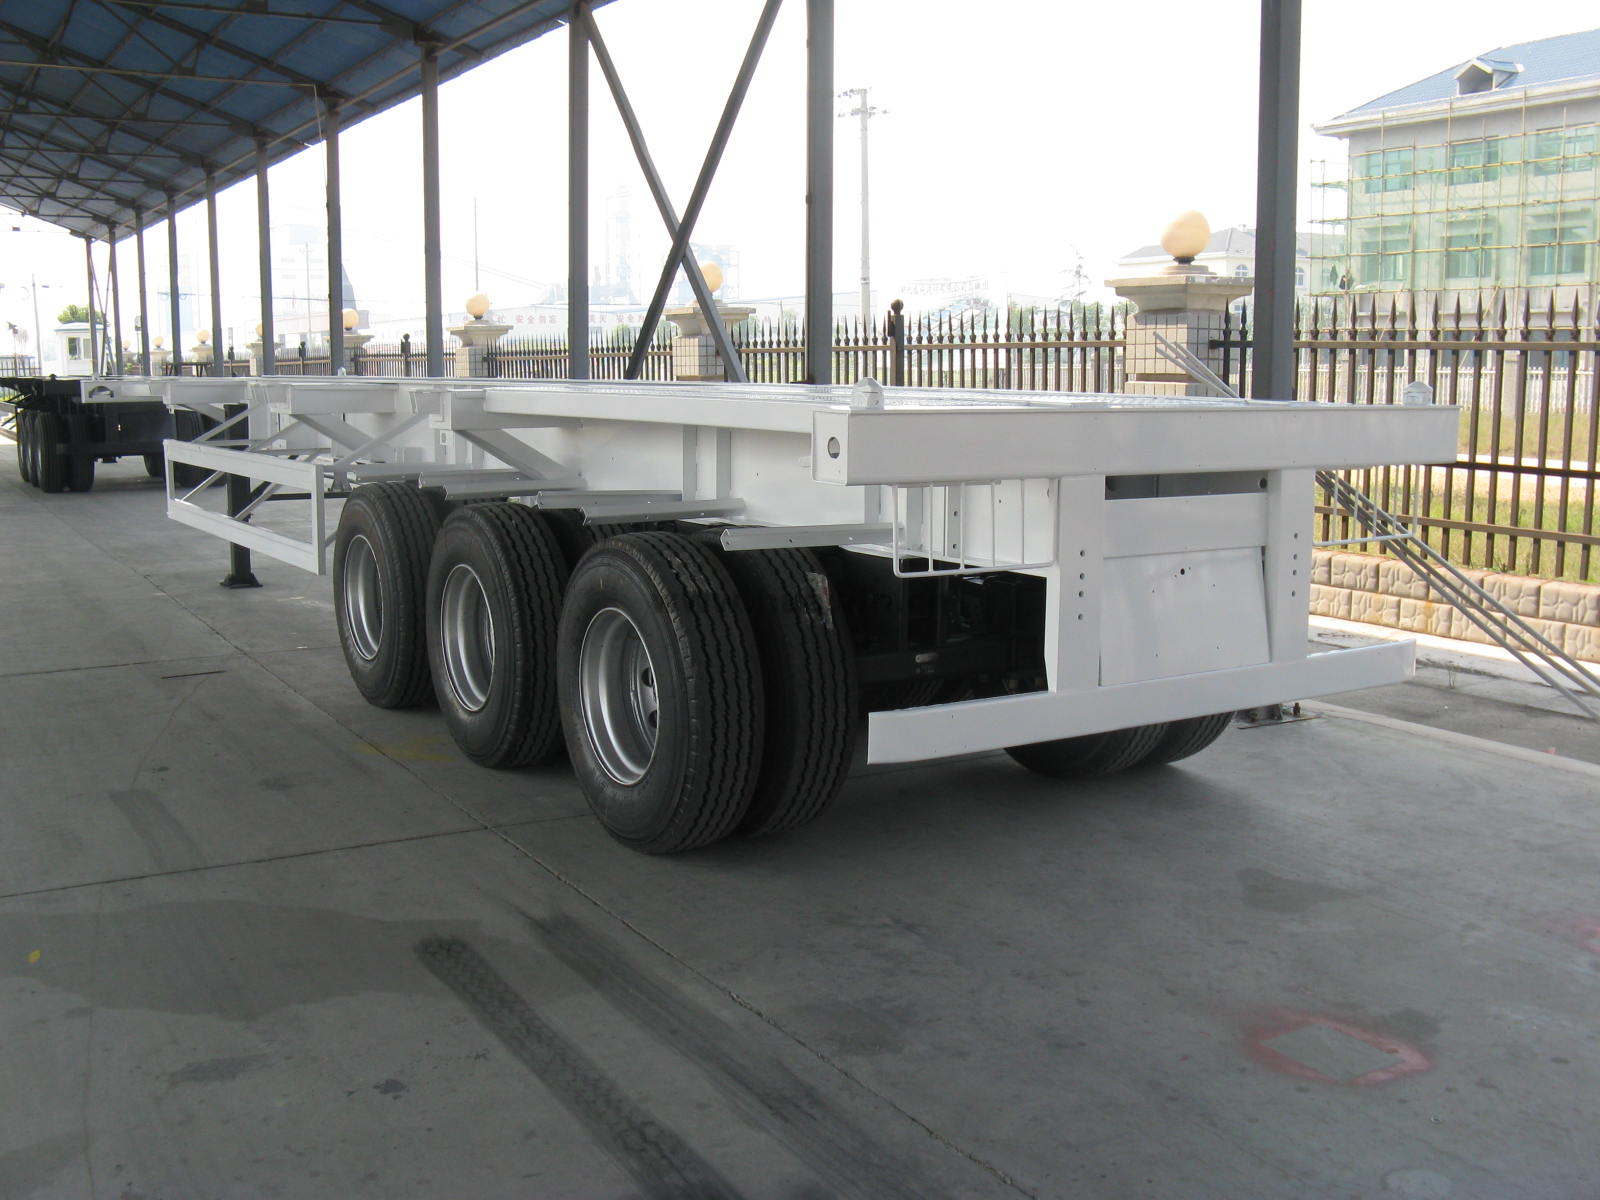 3 Axle 40 FT / 20 FT Container 45 Tons Skeletal نصف مقطورة